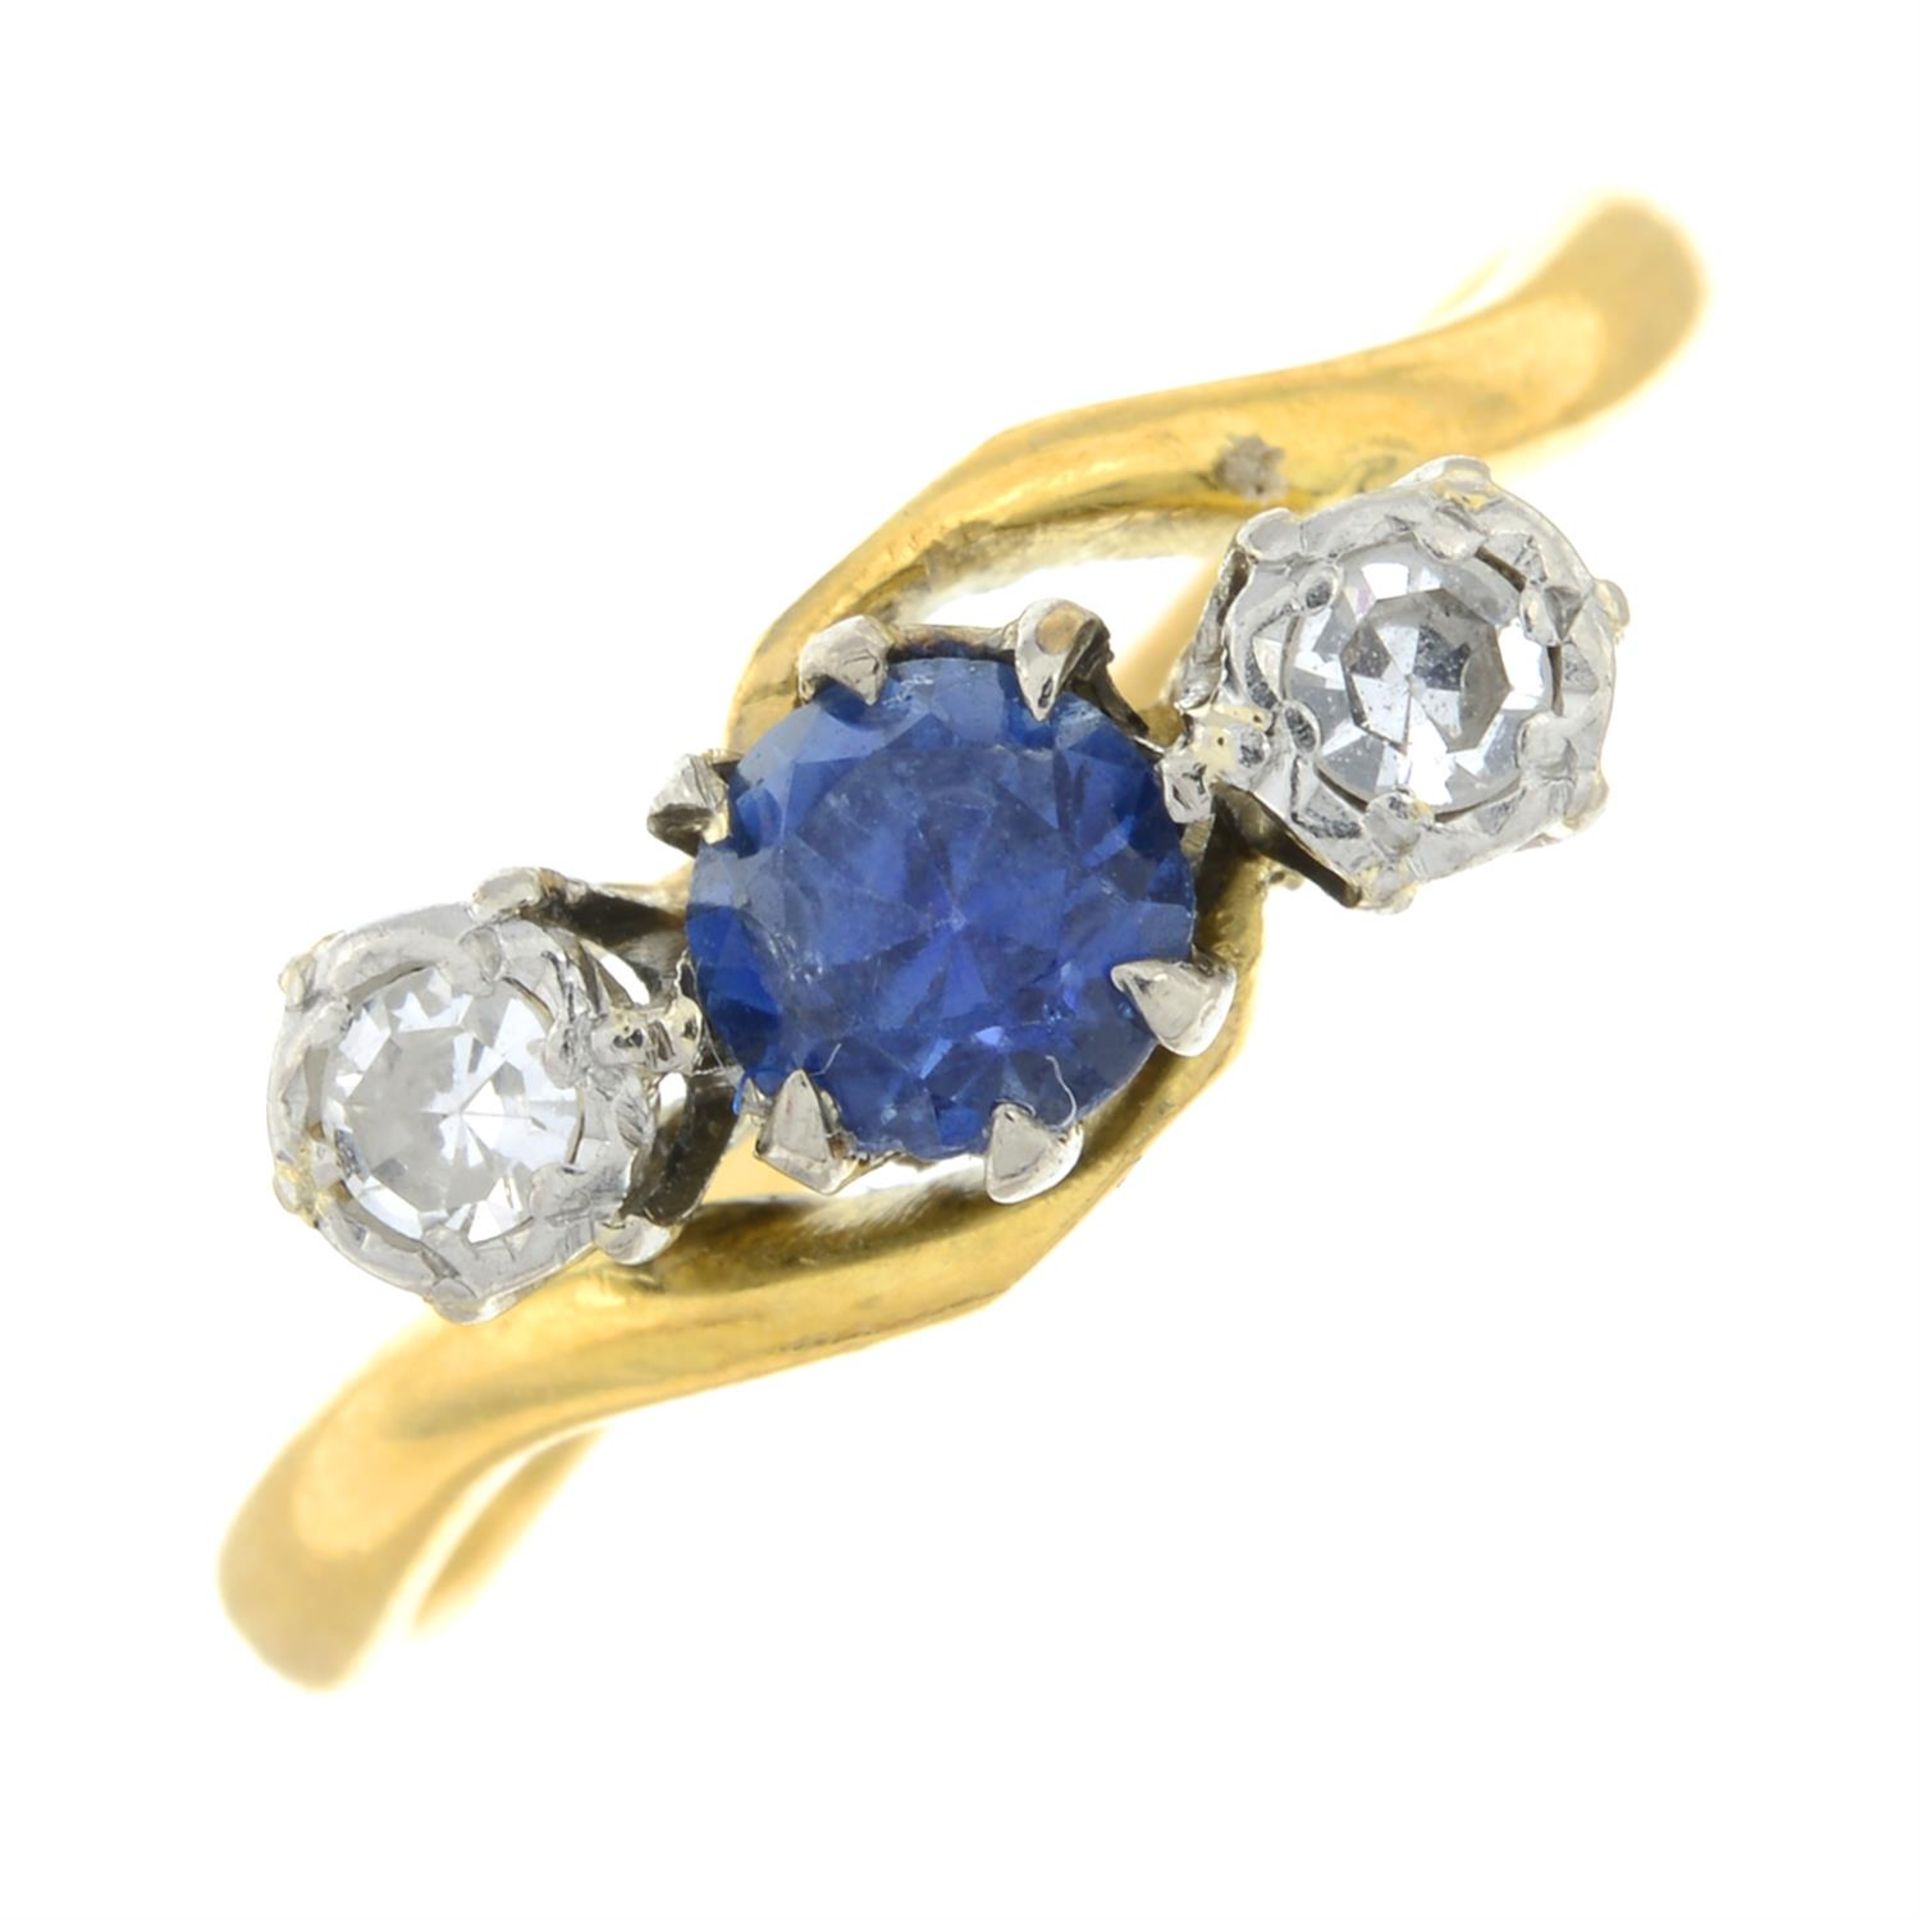 A mid 20th century 18ct gold and platinum, sapphire and diamond three-stone ring.